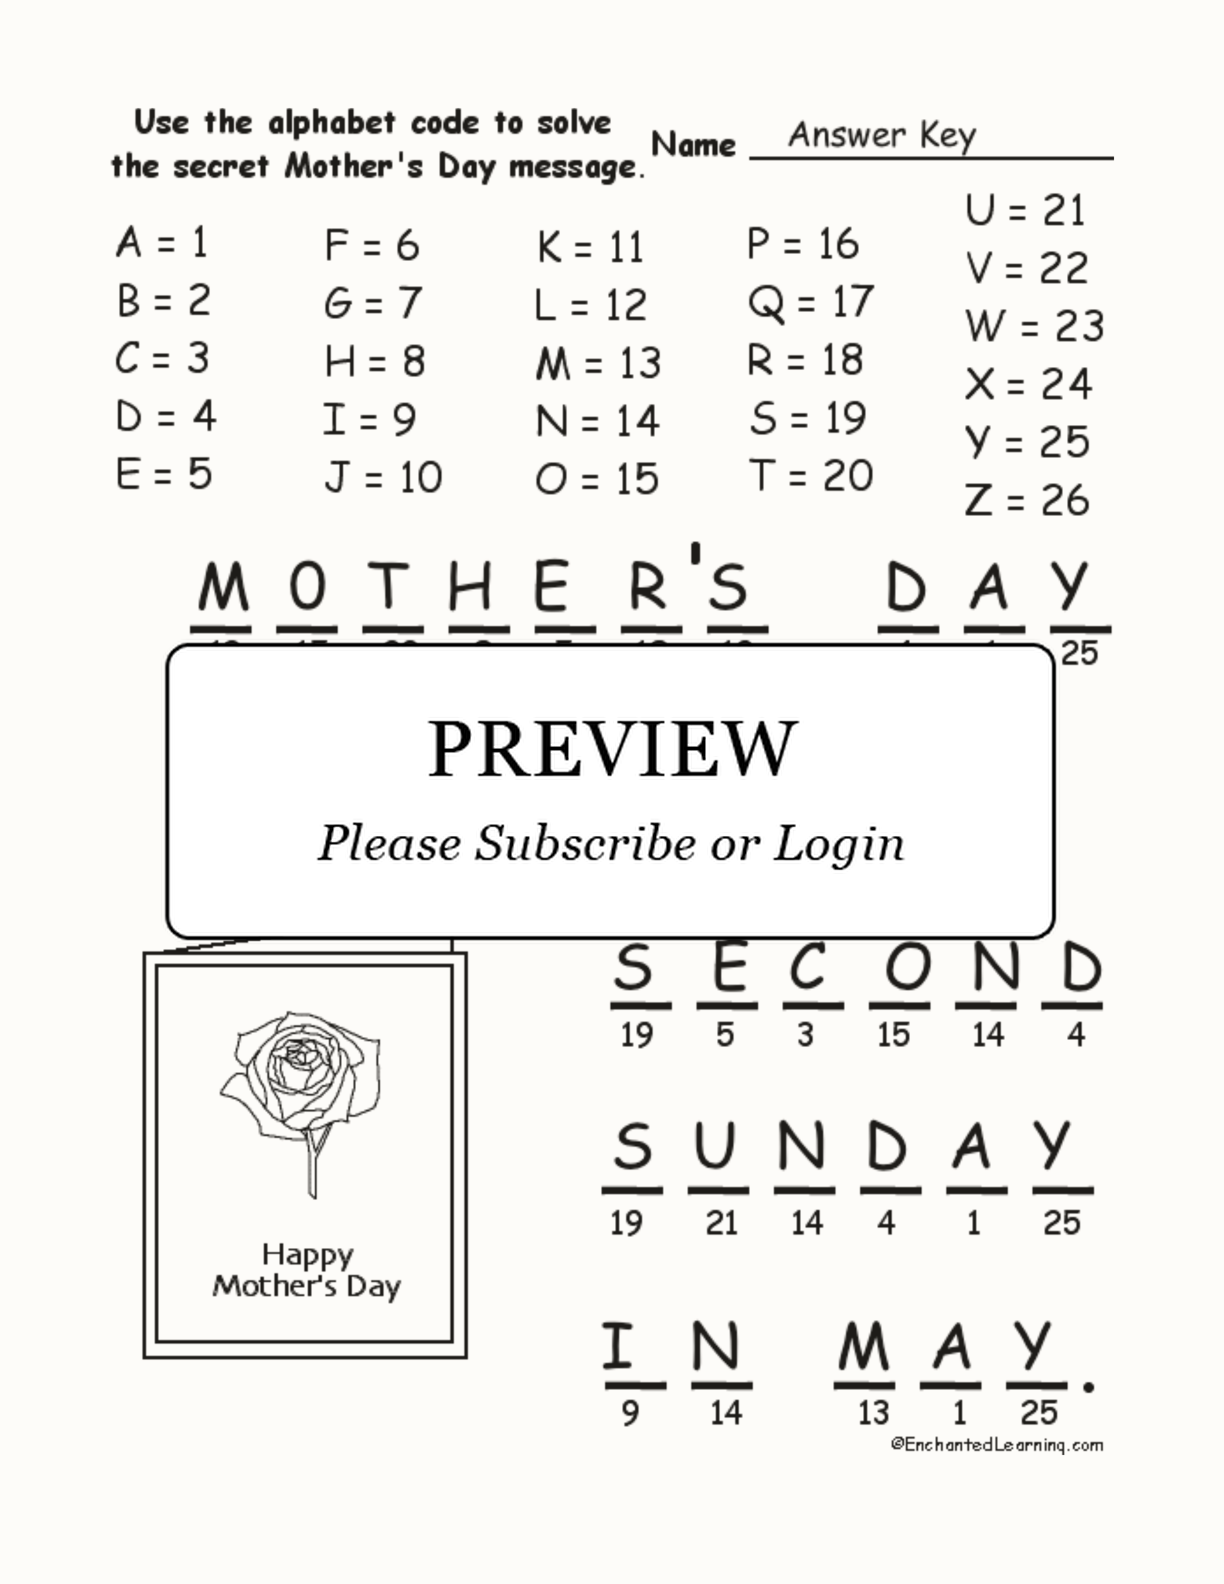 Mother's Day Alphabet Code interactive worksheet page 2